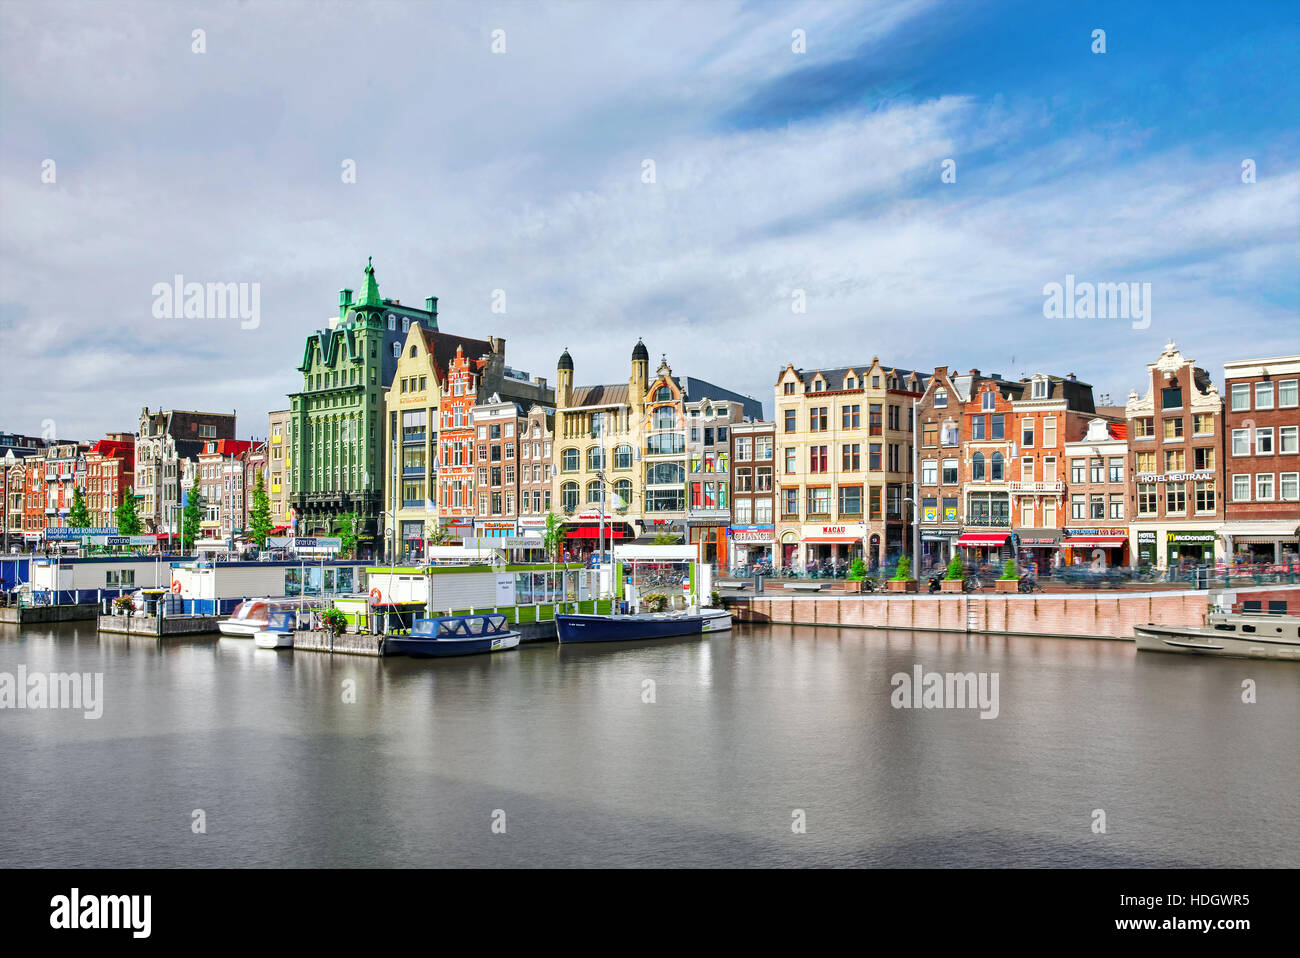 AMSTERDAM, NETHERLANDS - SEPTEMBER 15, 2015: Beautiful views of the streets, ancient buildings, people, embankments of Amsterdam - also call 'Venice i Stock Photo